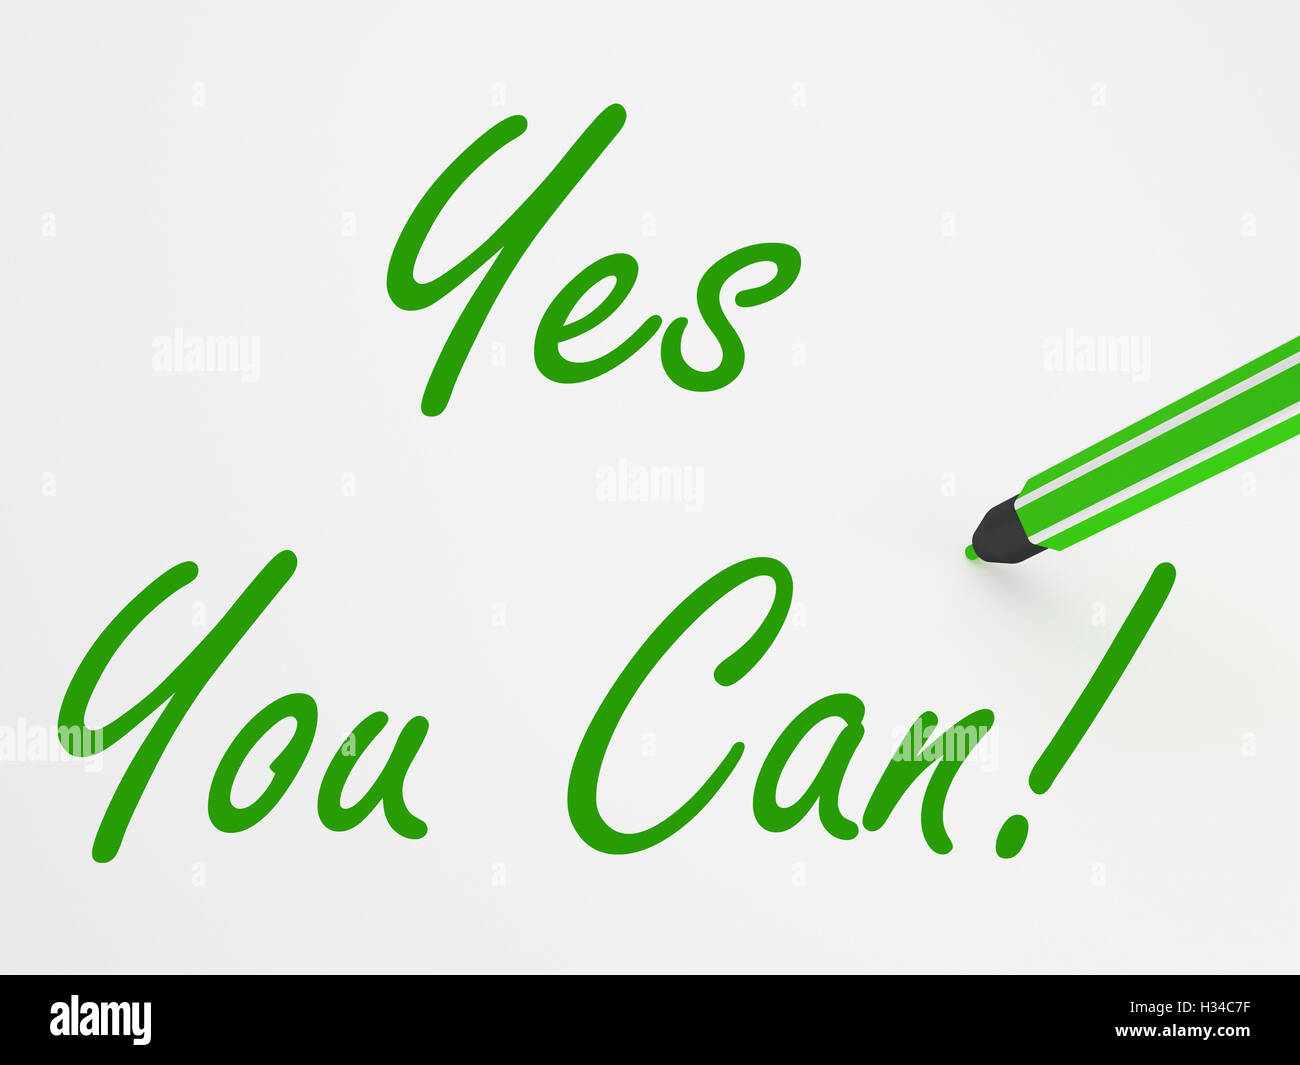 Yes You Can! On Whiteboard Means Encouragement And Optimism Stock Photo